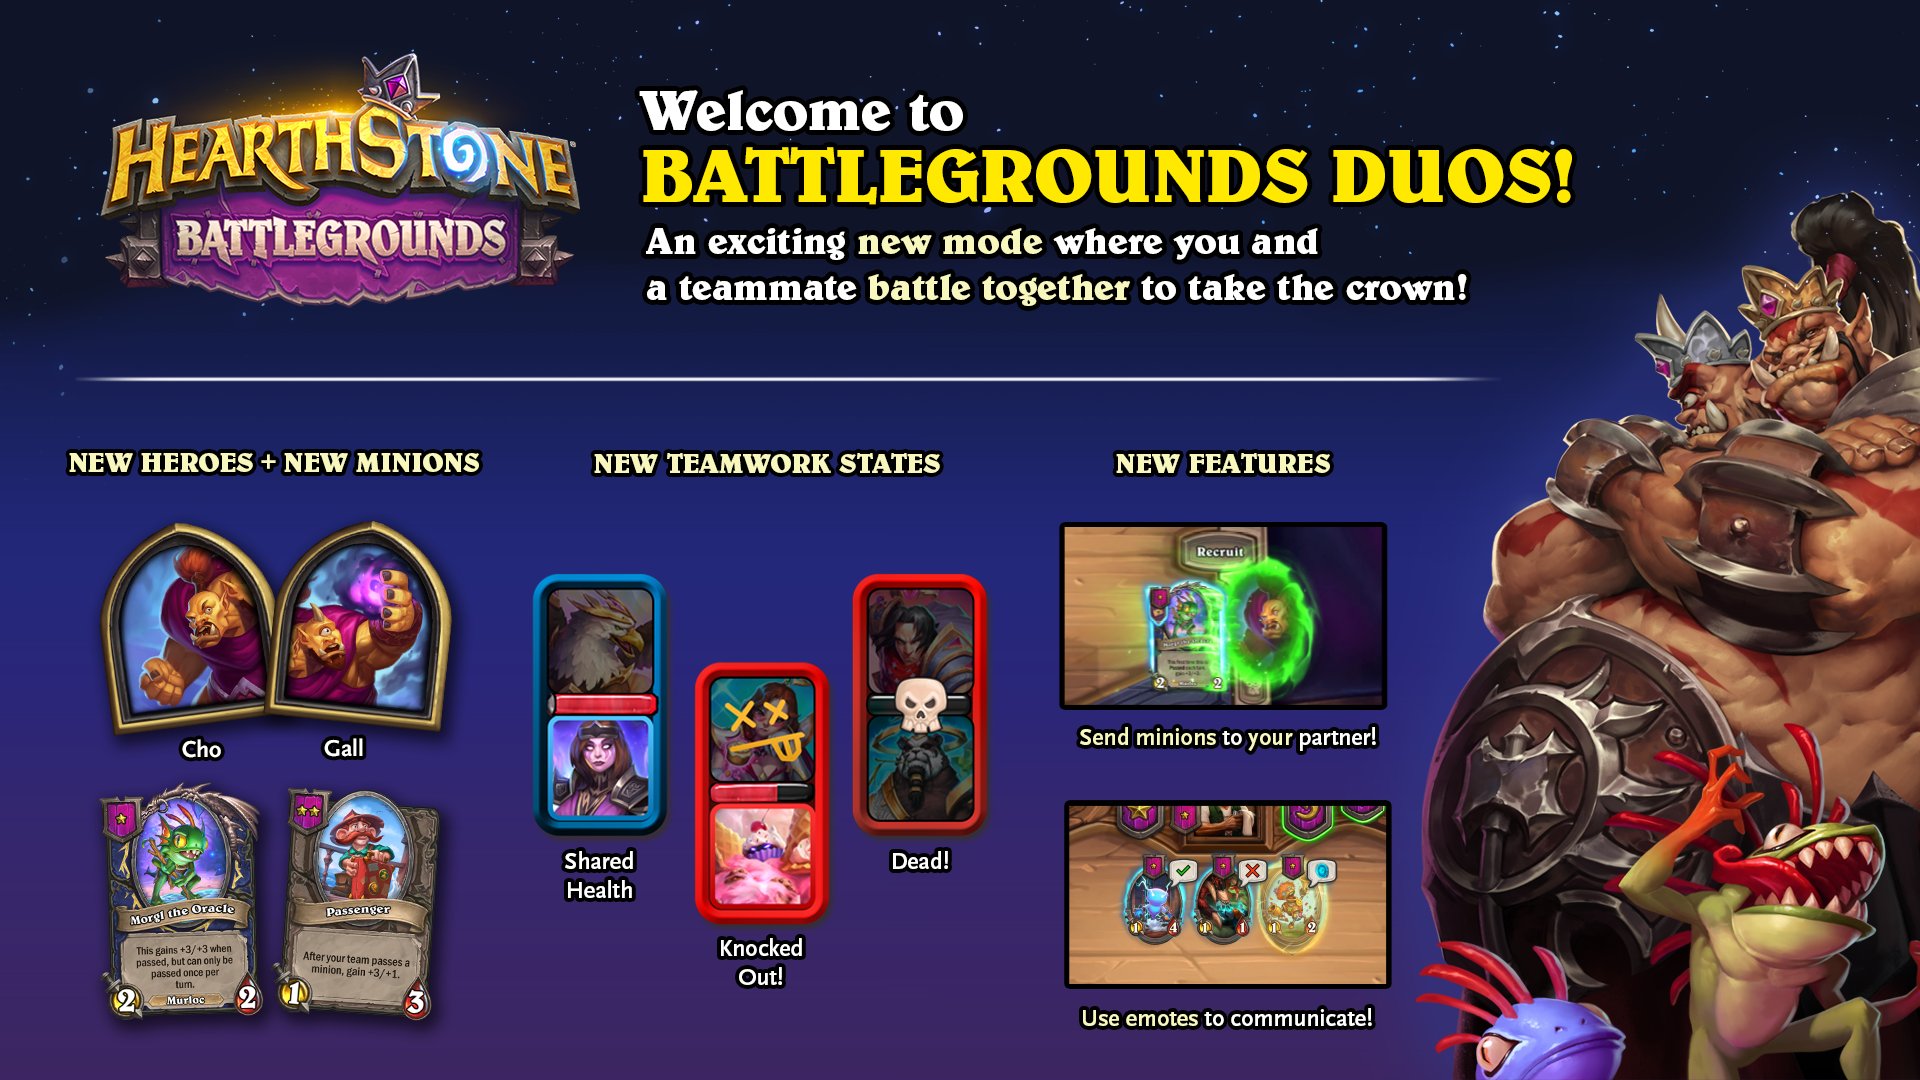 An infographic detailing Hearthstone Battlegrounds Duos Mode, an exciting new mode where you and a teammate battle together to take the crown! New Heroes + New Minions, showing two heroes "Cho" and "Gall." Below them are two cards: Murgl the Oracle, and Passenger. New Teamwork States: Shared health, knocked out!, and dead! New Features: Send minions to your partner and use emotes to communicate.